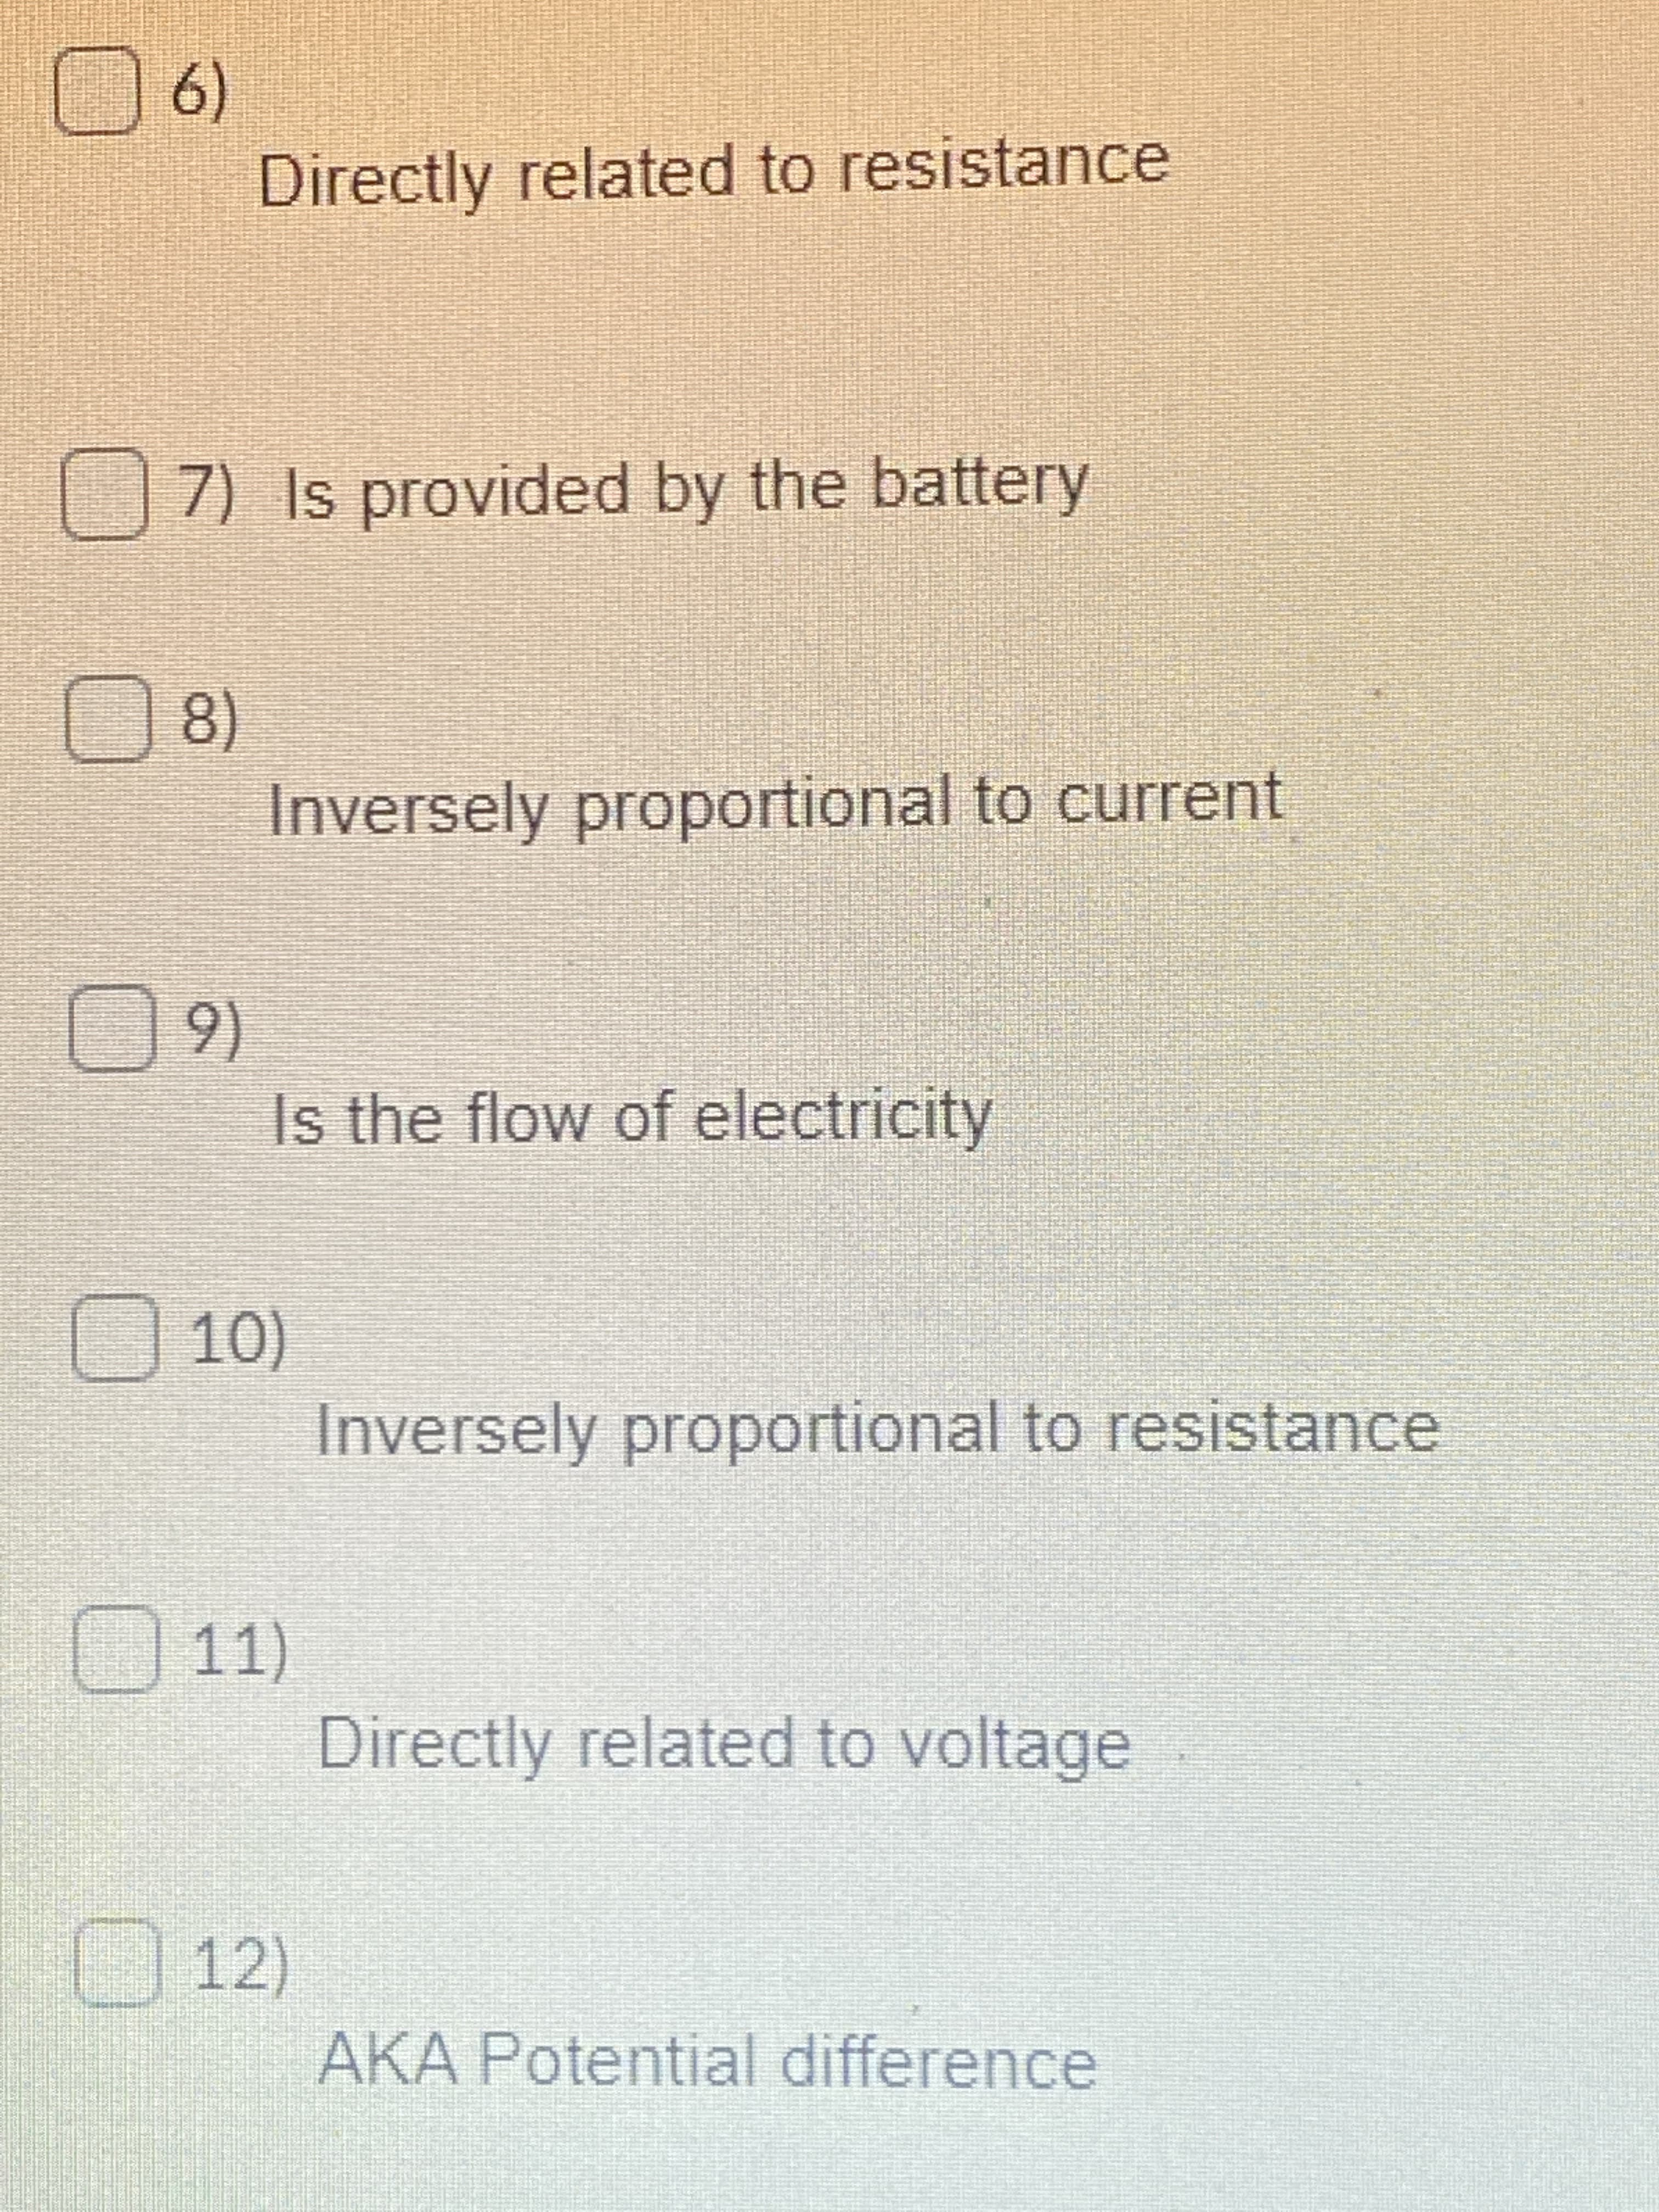 6)
Directly related to resistance
7) Is provided by the battery
8)
Inversely proportional to current
(60
Is the flow of electricity
10)
Inversely proportional to resistance
O11)
Directly related to voltage
12)
AKA Potential difference
